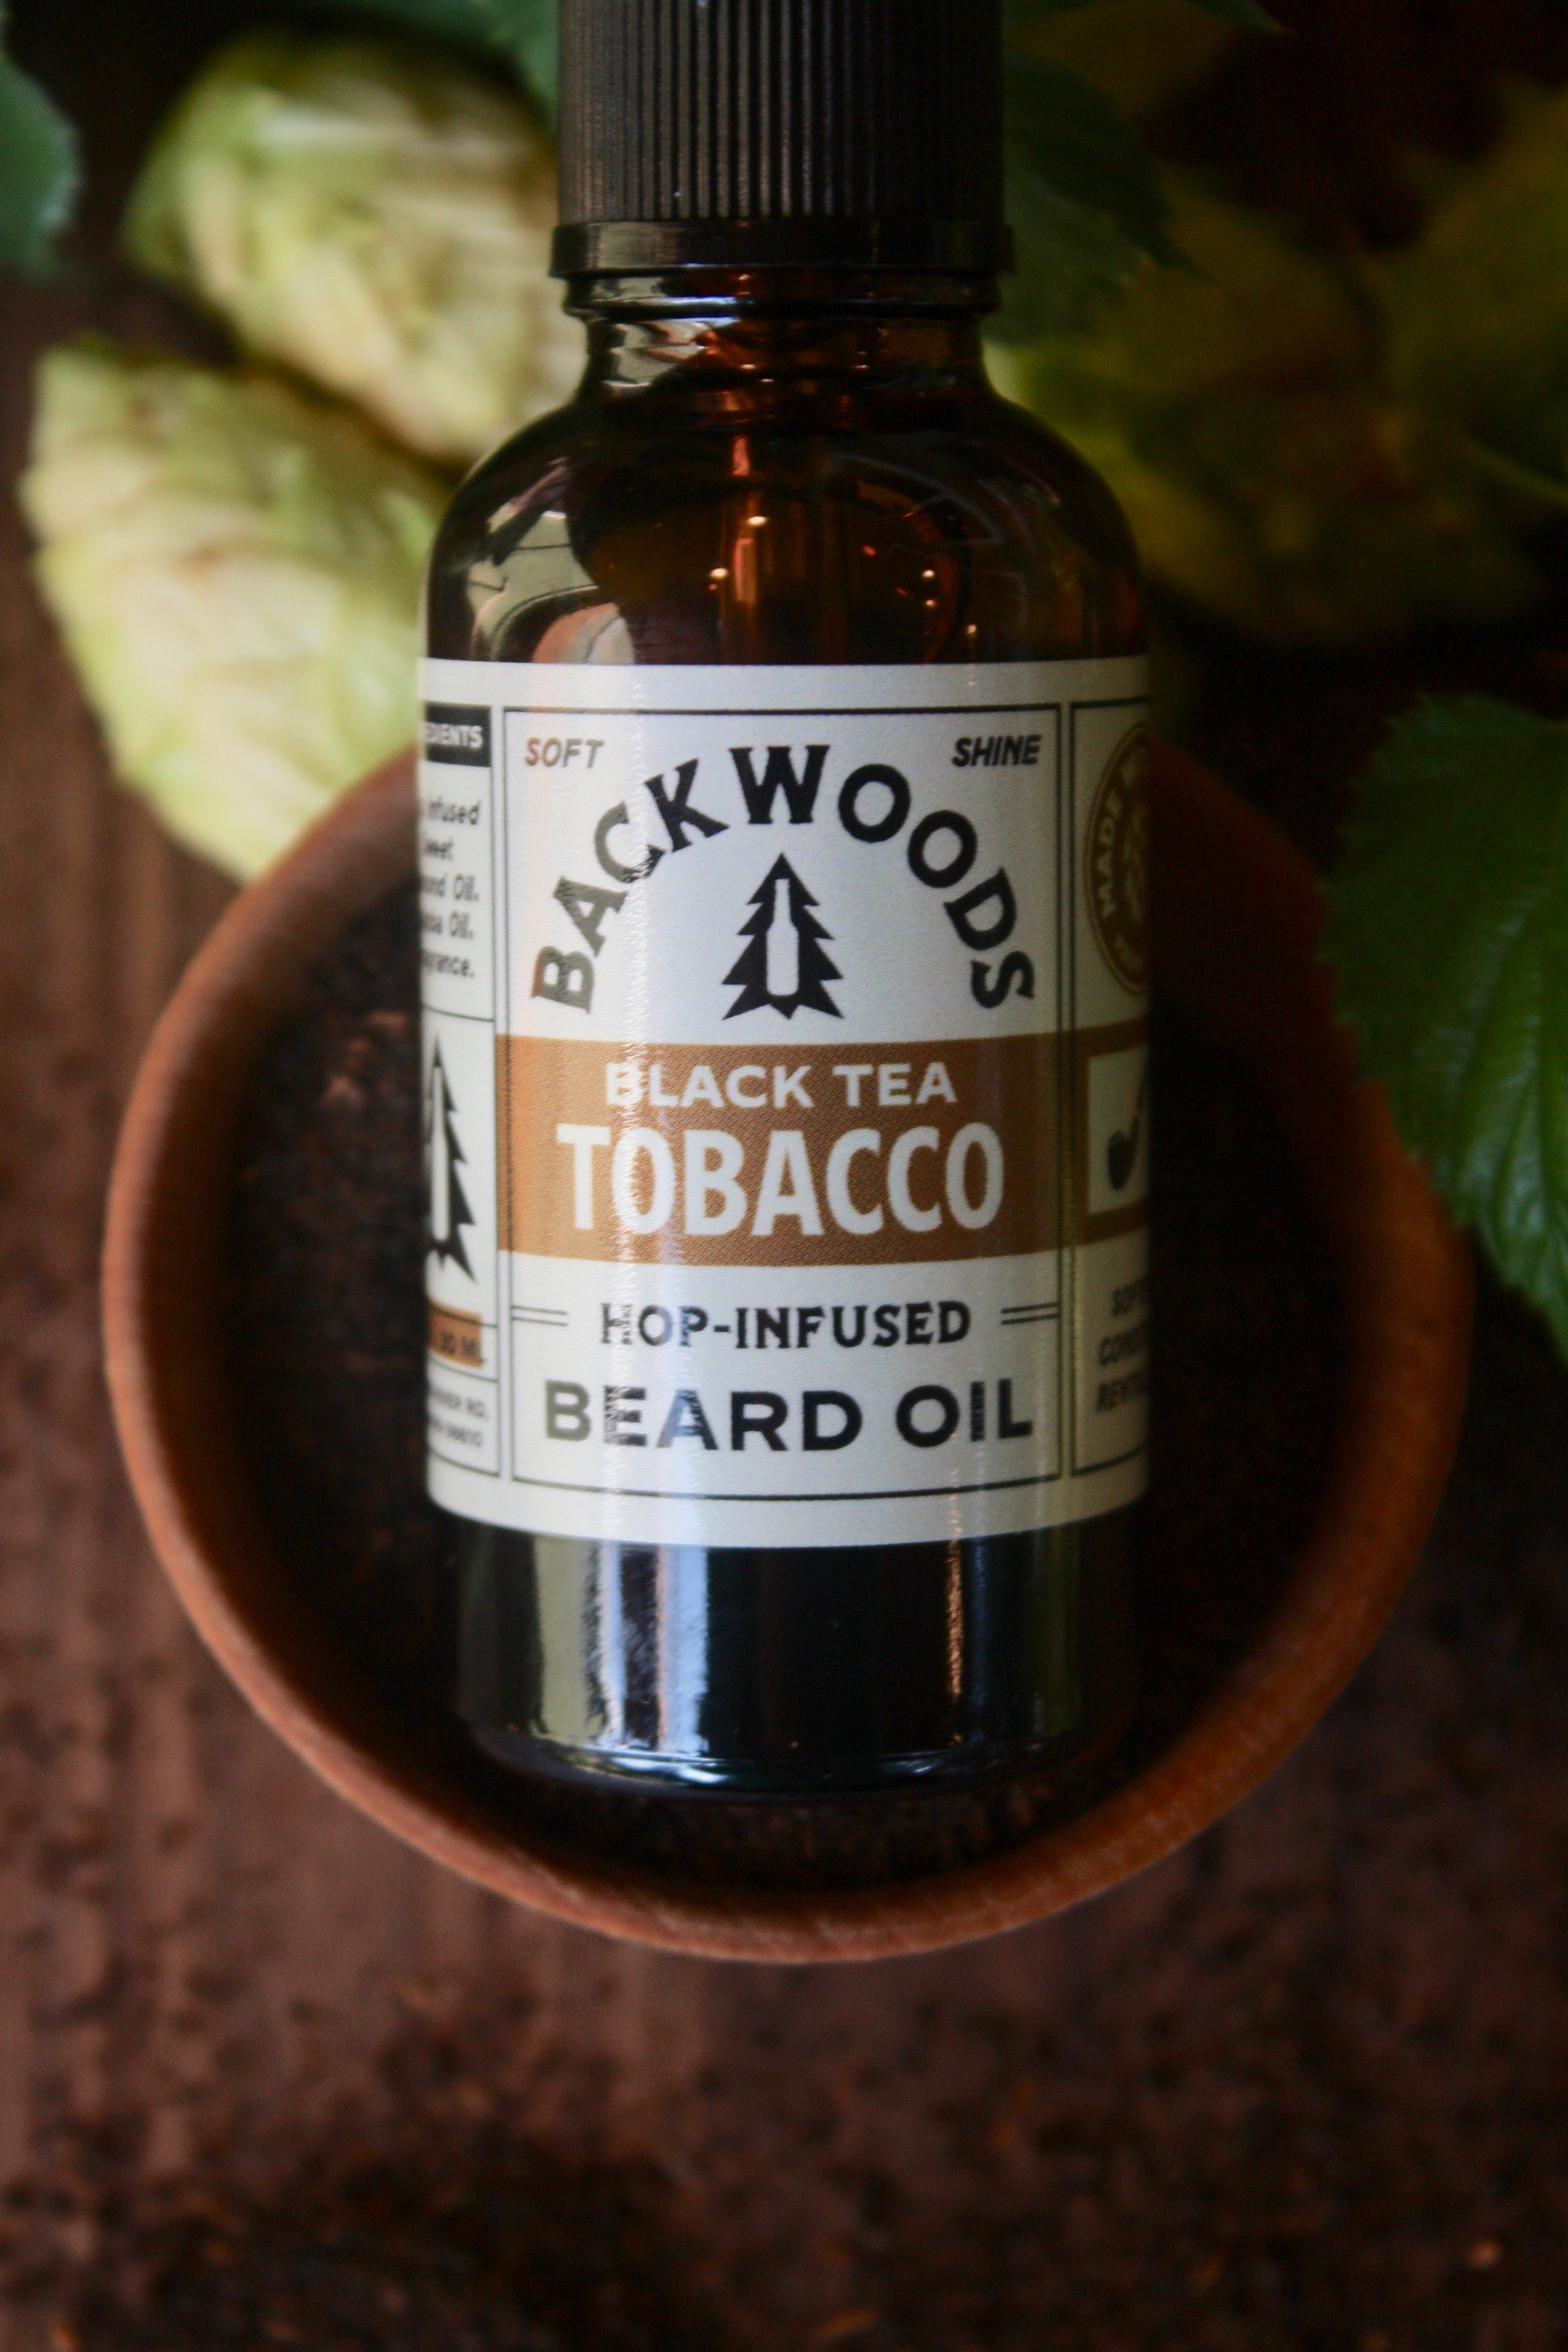 The Smoker, Mustache & Beard Oil - Made with Tobacco and Hemp Oils